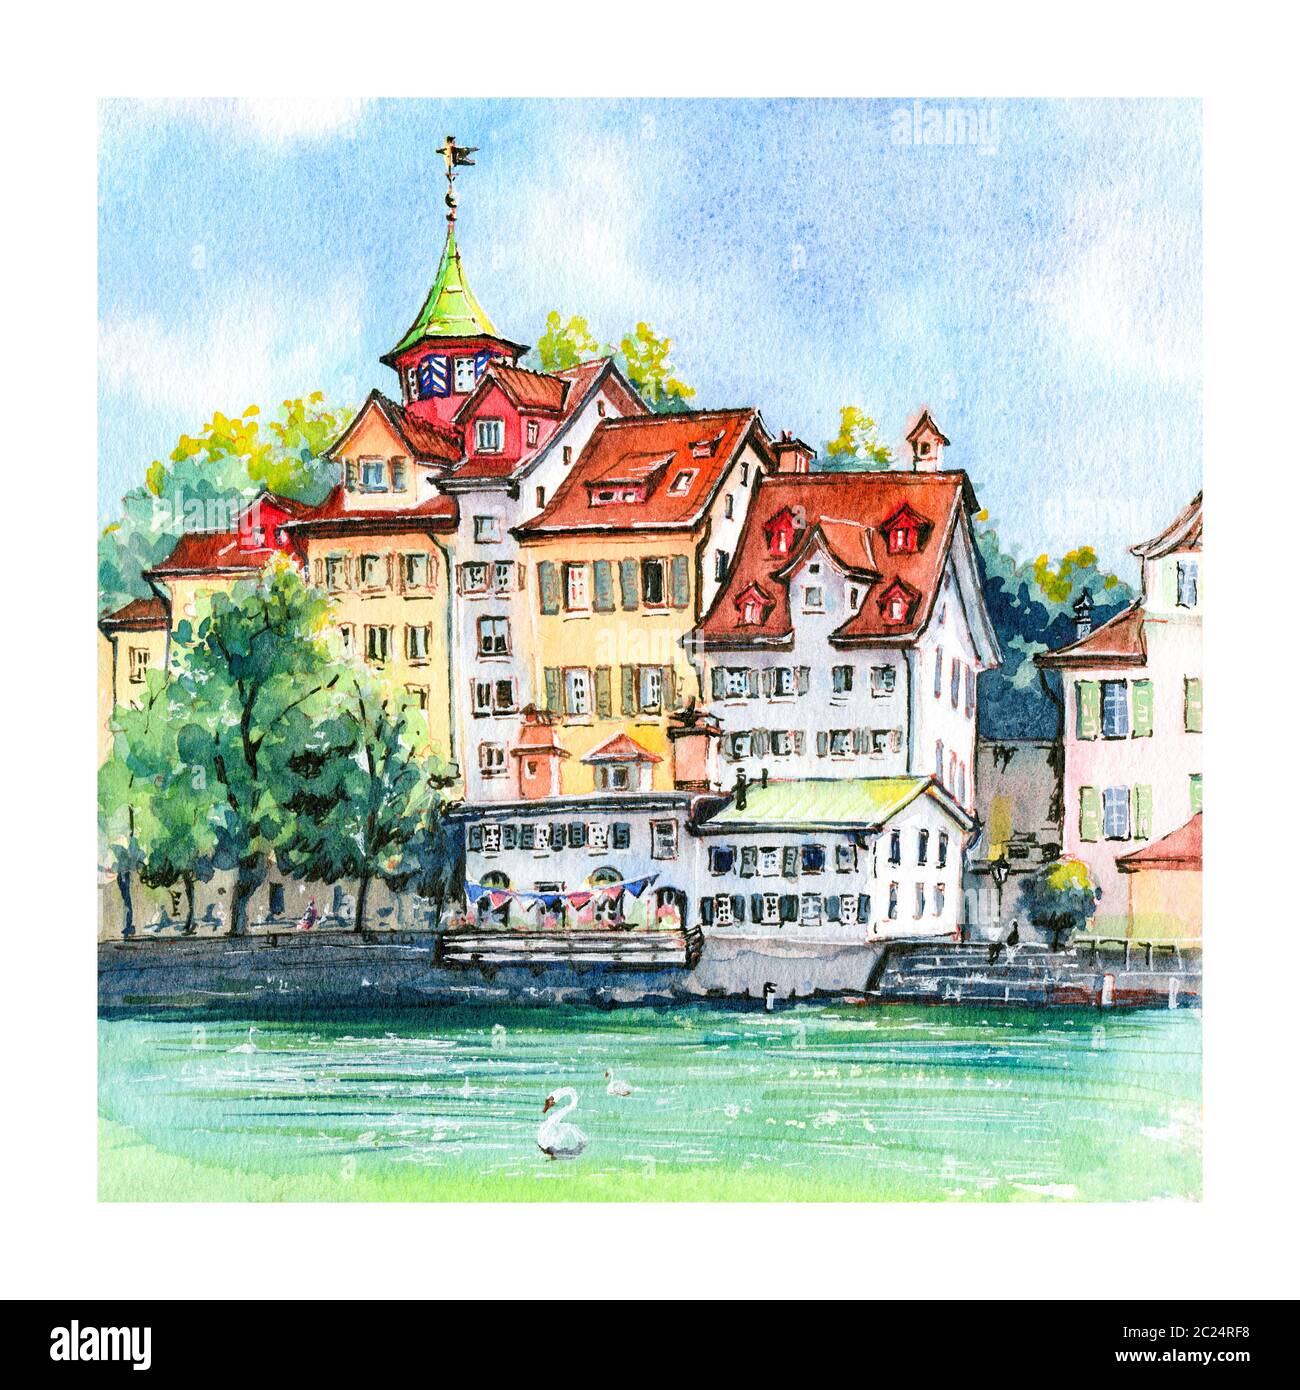 Watercolor sketch of cozy houses by the river Limmat in the Old Town of Zurich, the largest city in Switzerland. Stock Photo